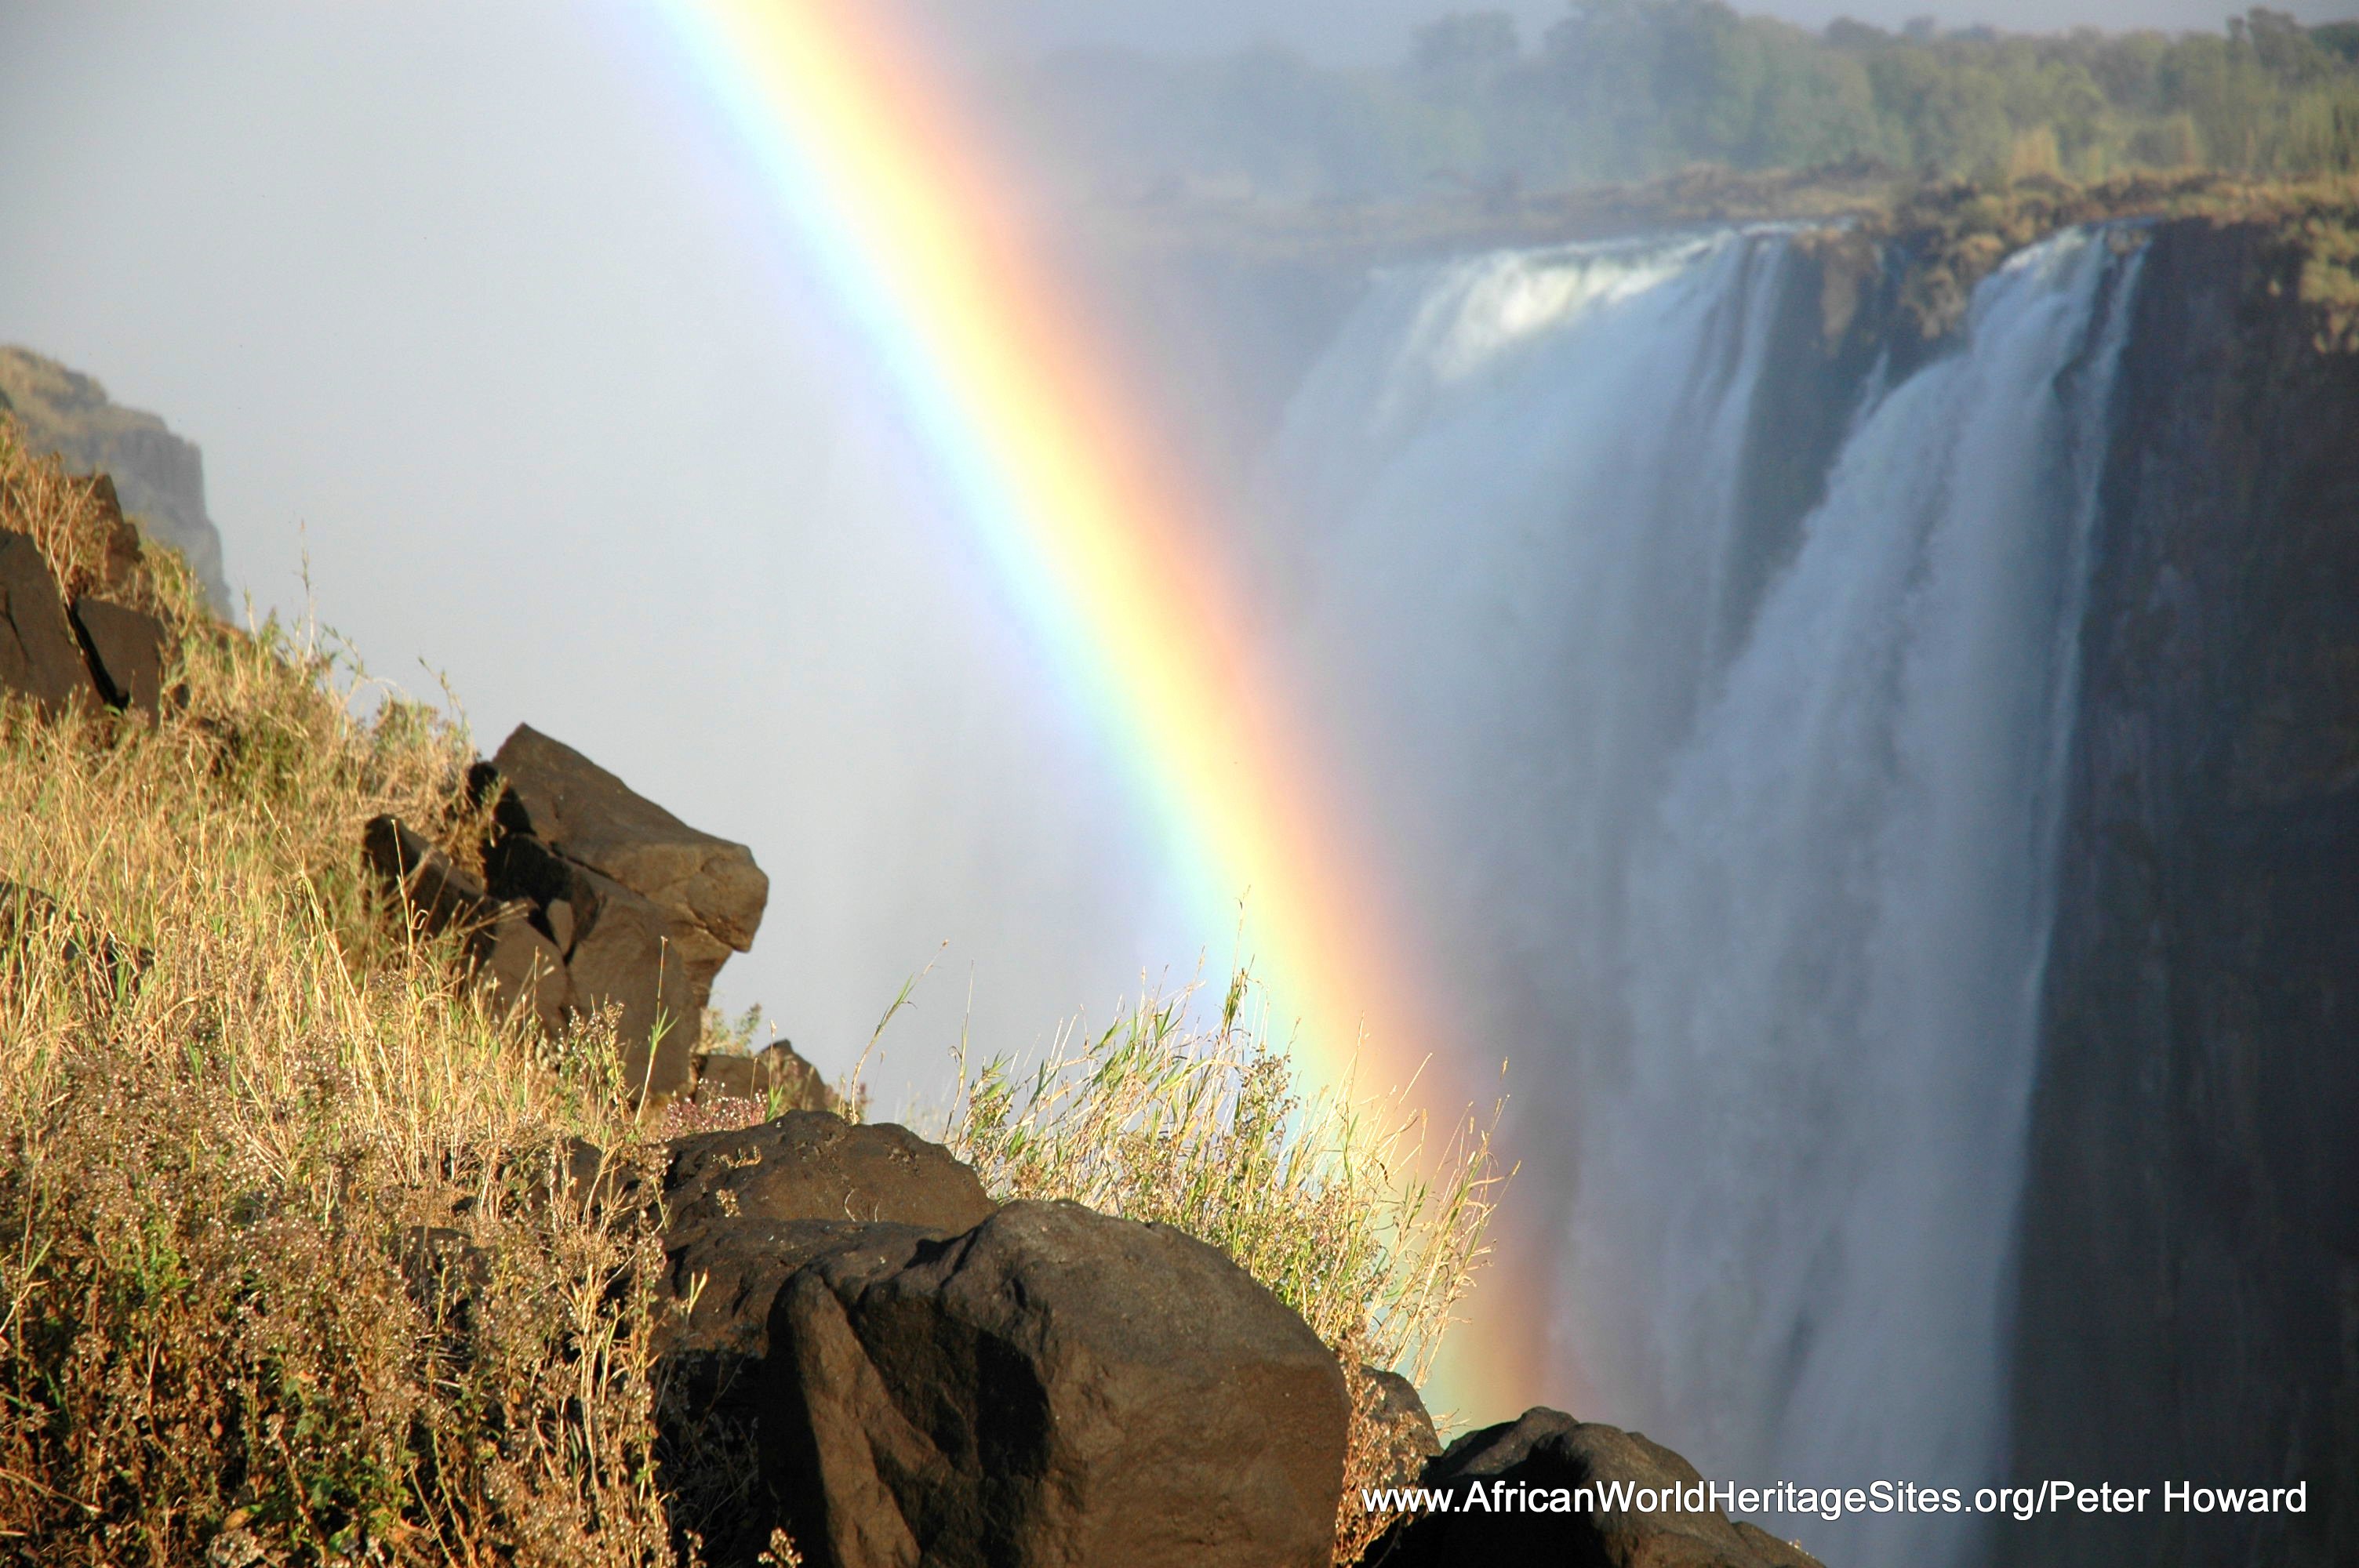 A rainbow created by the plume of spray generated by the waters of the Zambezi River at Victoria Falls/Mosi-oa-tunya